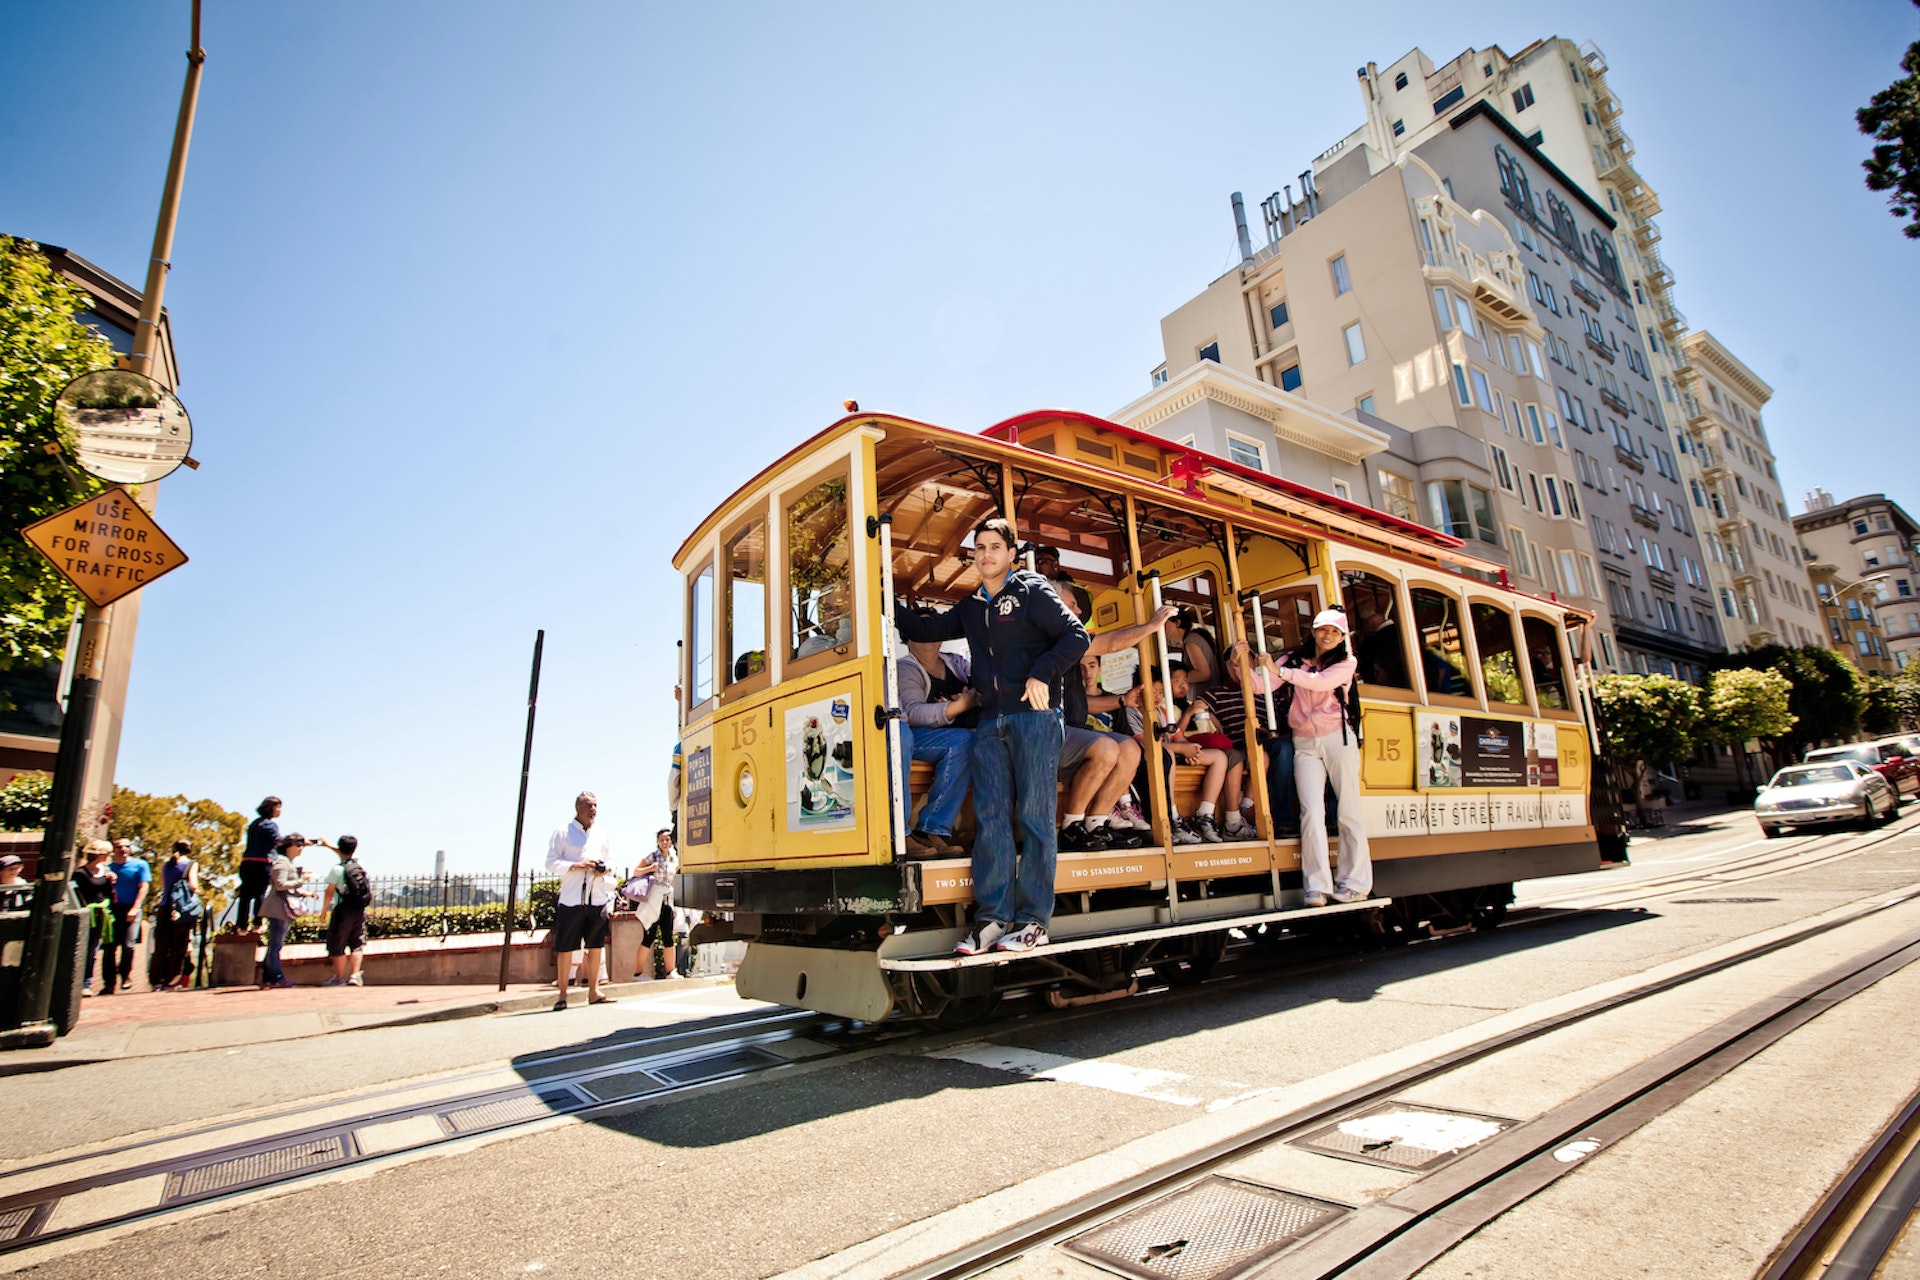 People riding on a cable car that's shooting down a hill